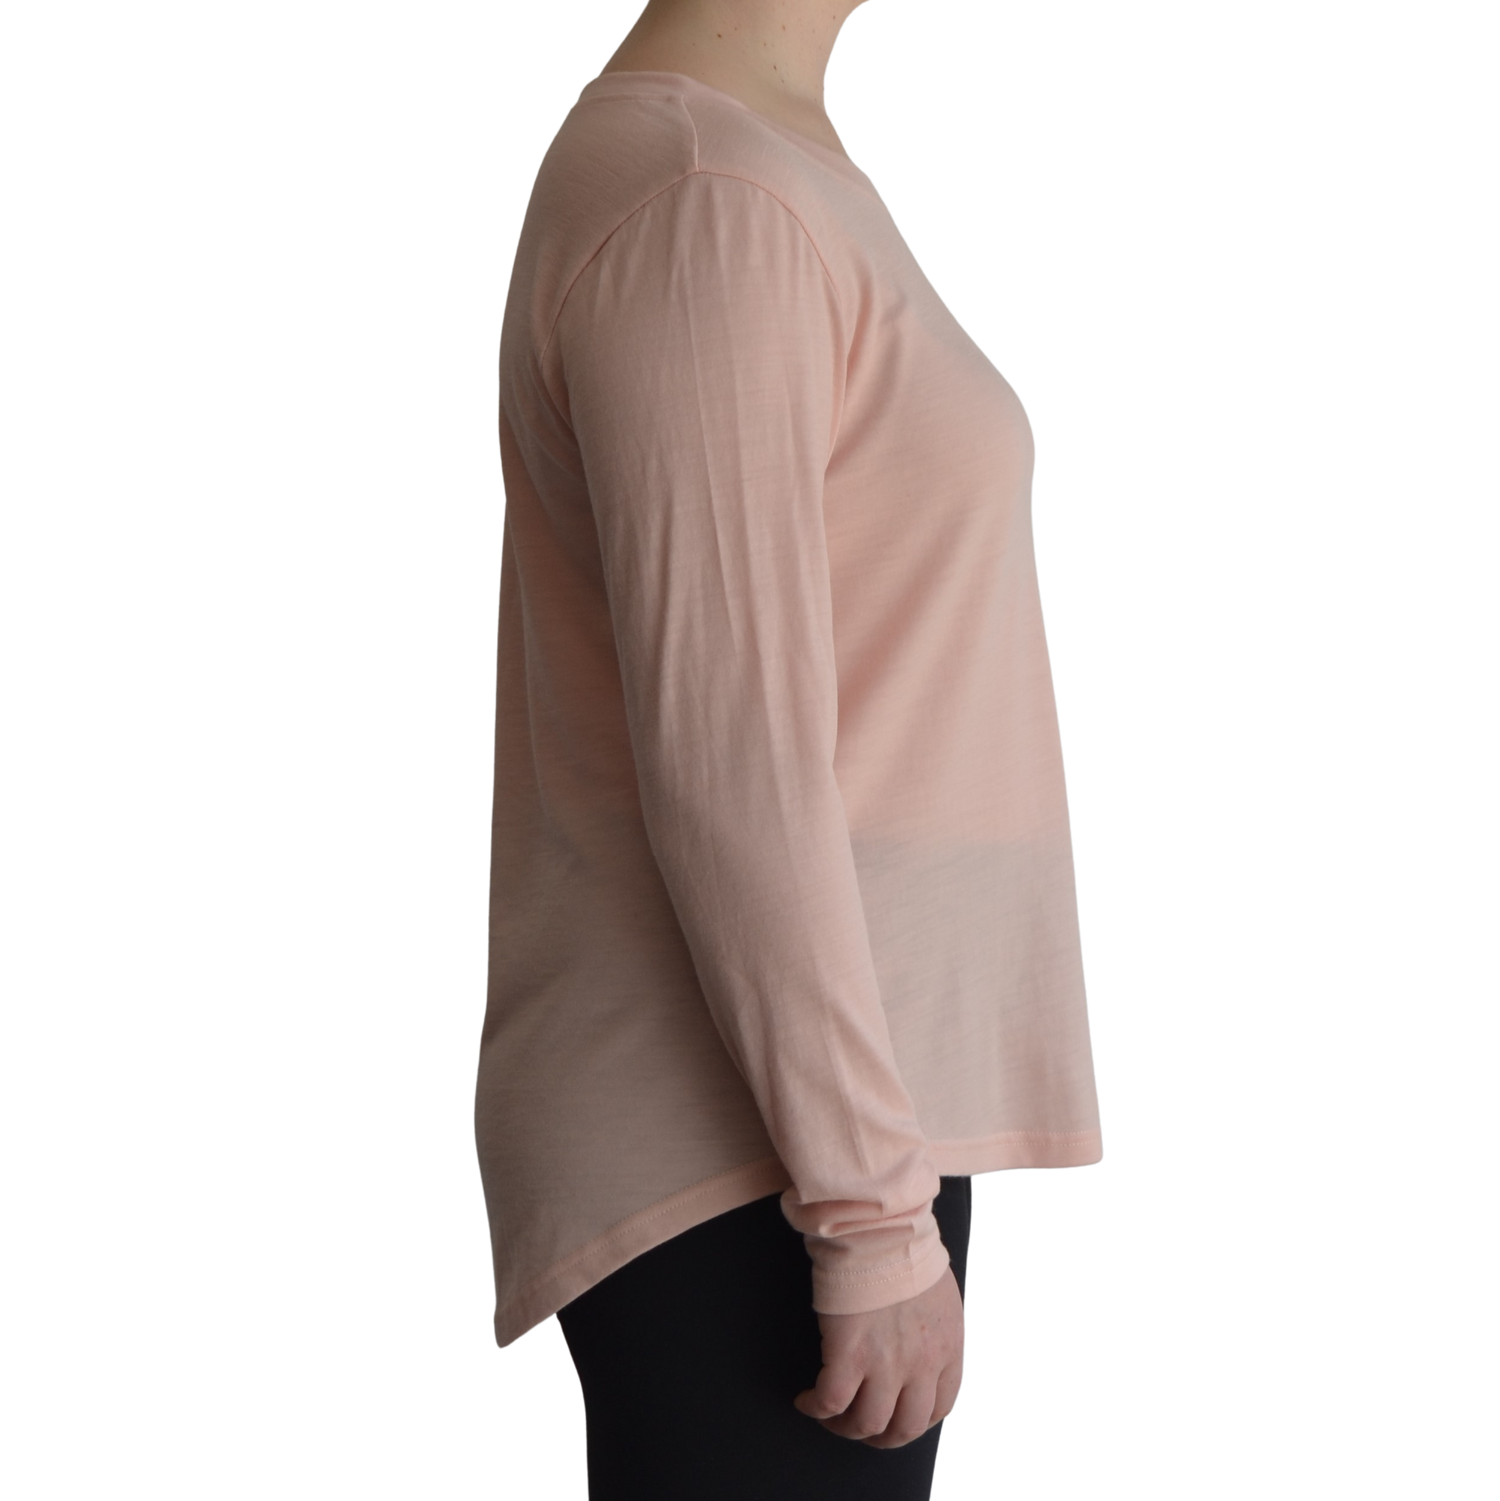 Links long sleeve merino top in petal light pink colour, model is standing in profile showing the side view of the shirt with a scooped hemline that drops lower at the back. 